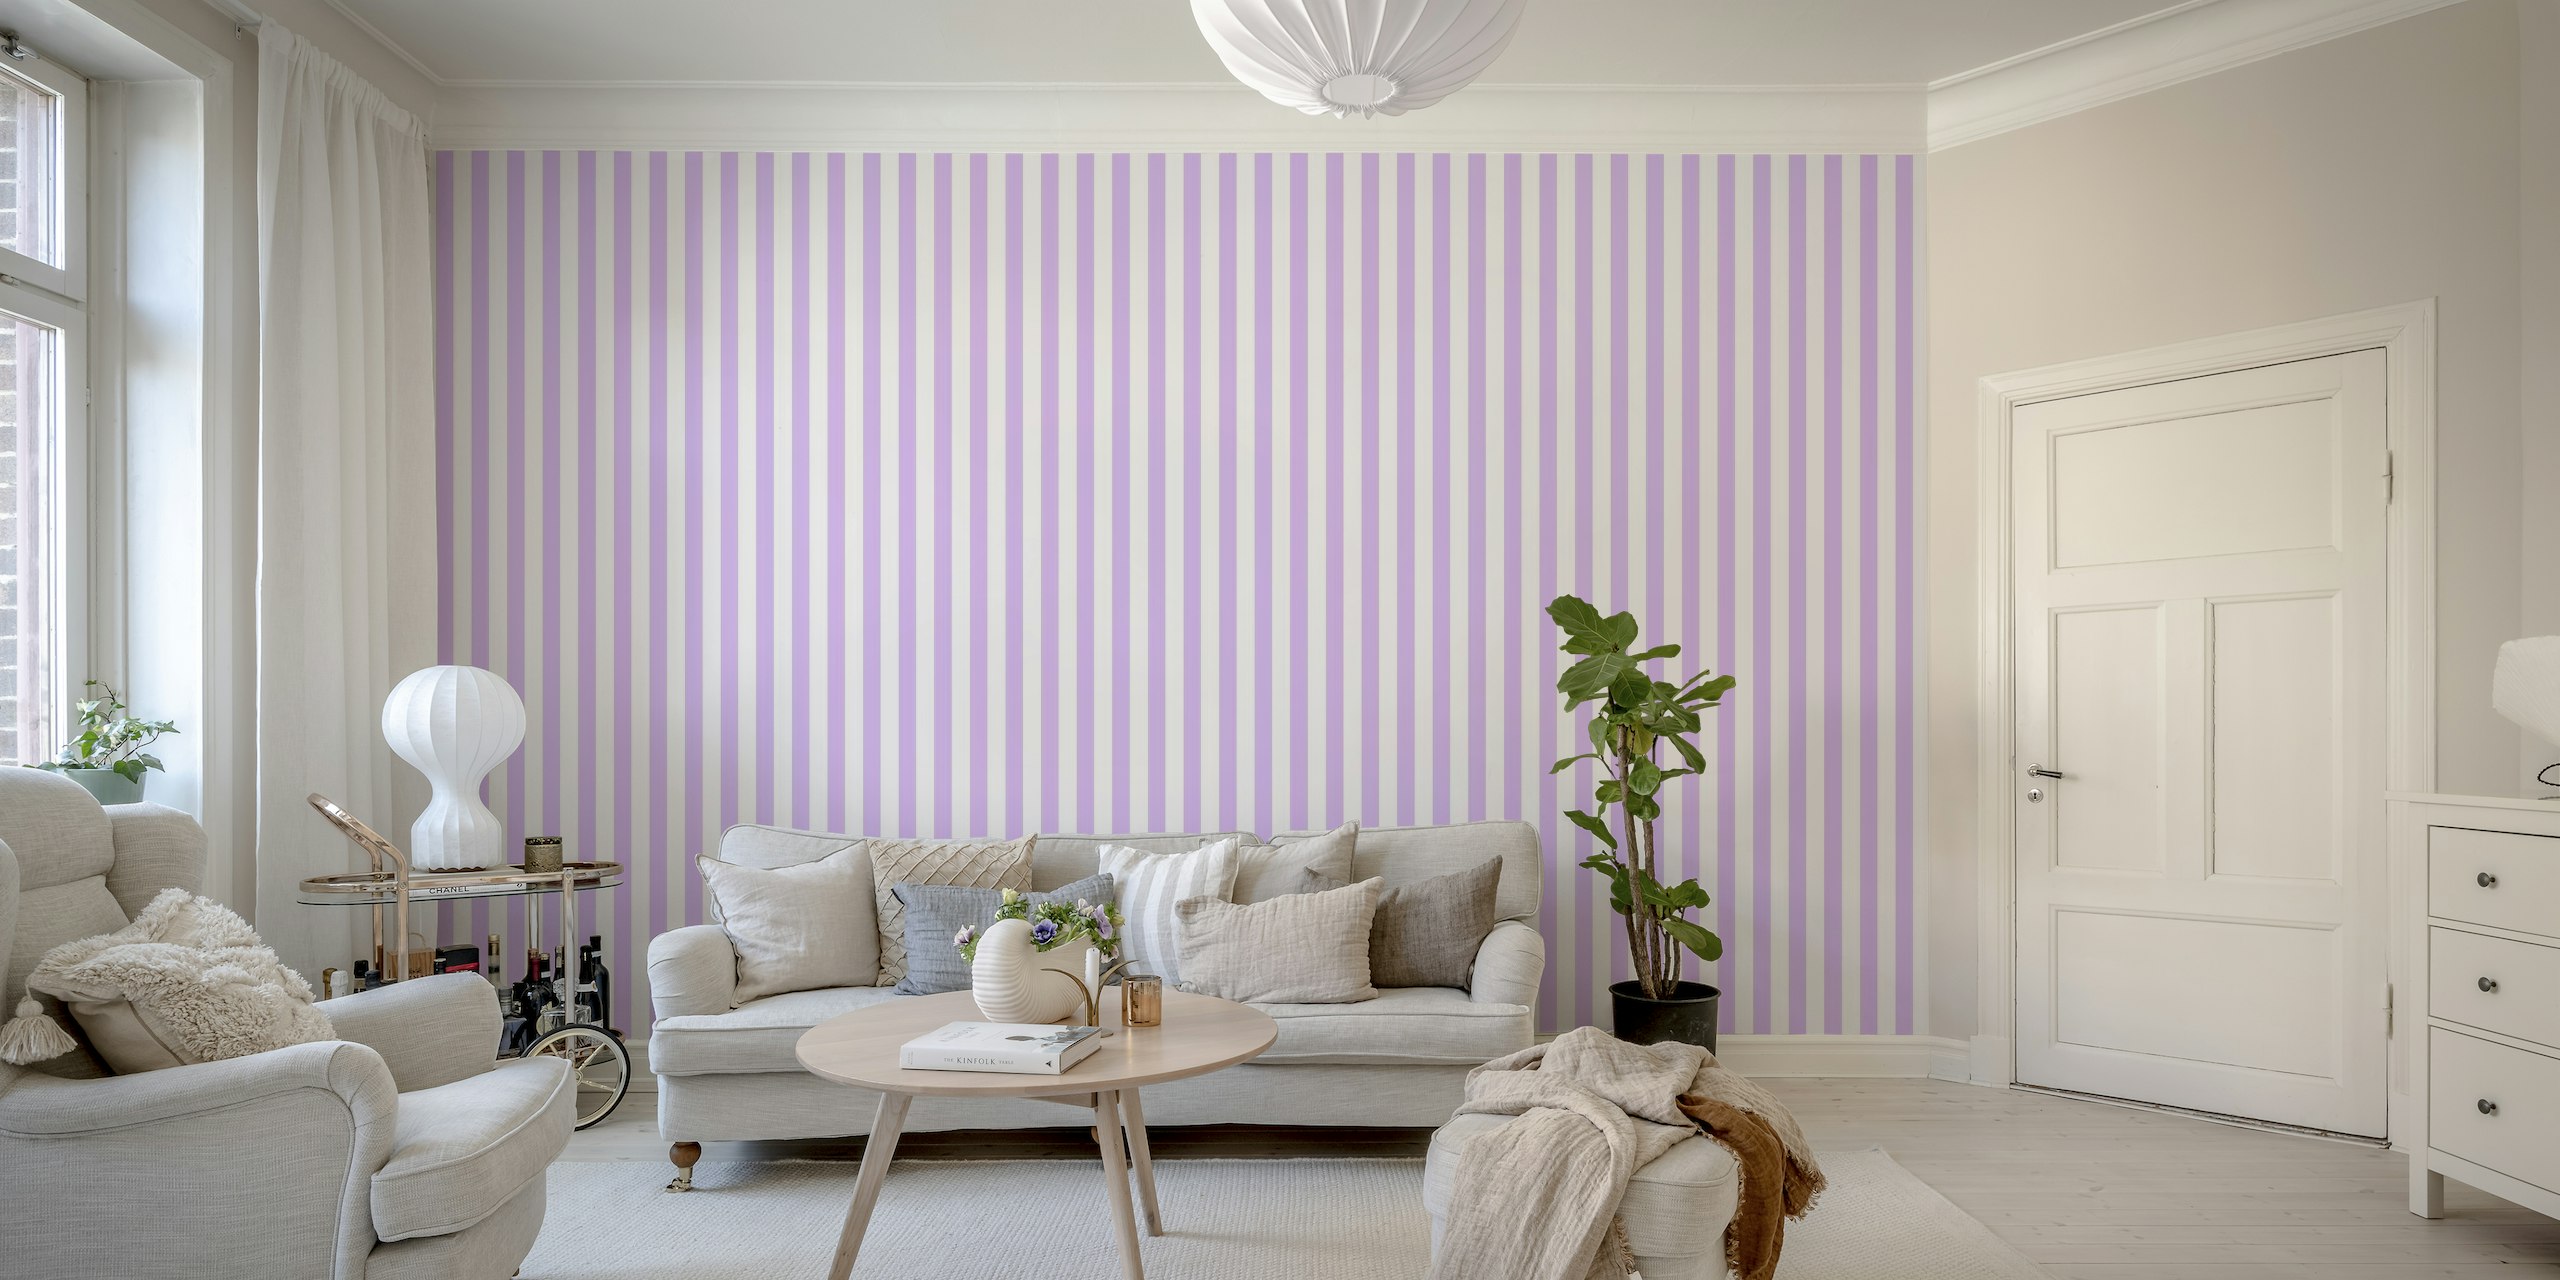 Lilac and white stripes wallpaper